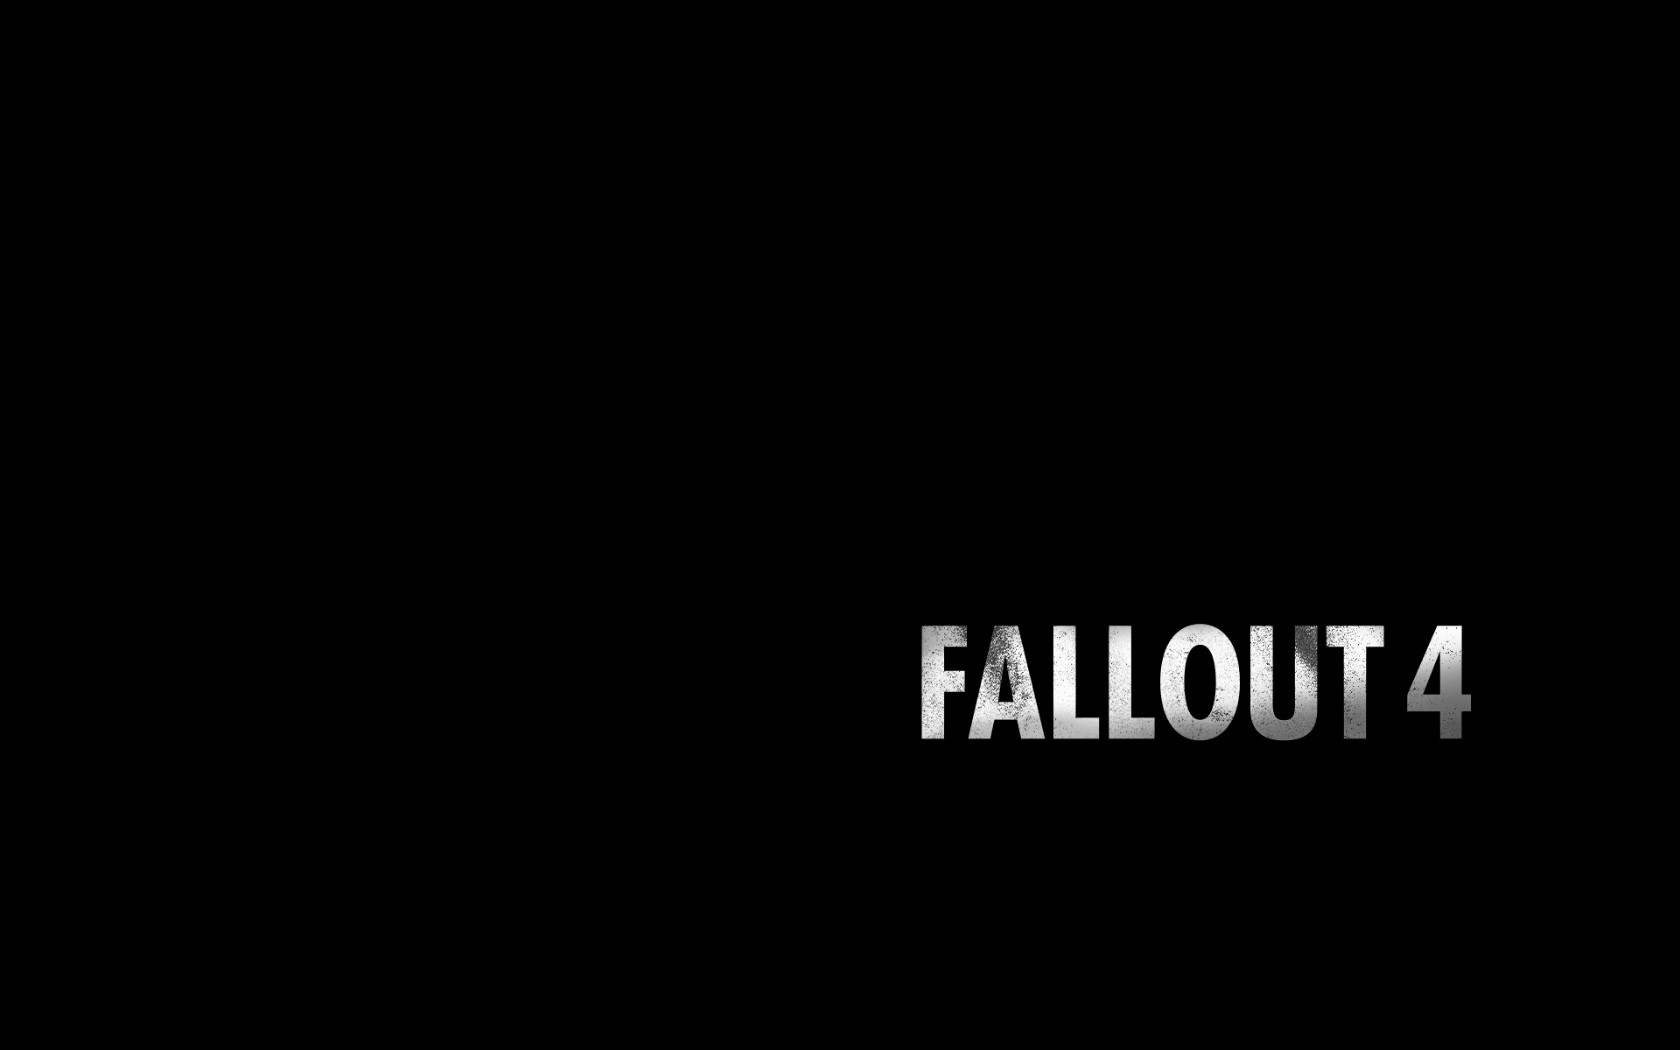 General 1680x1050 Fallout 4 Fallout typography black background minimalism PC gaming simple background video games